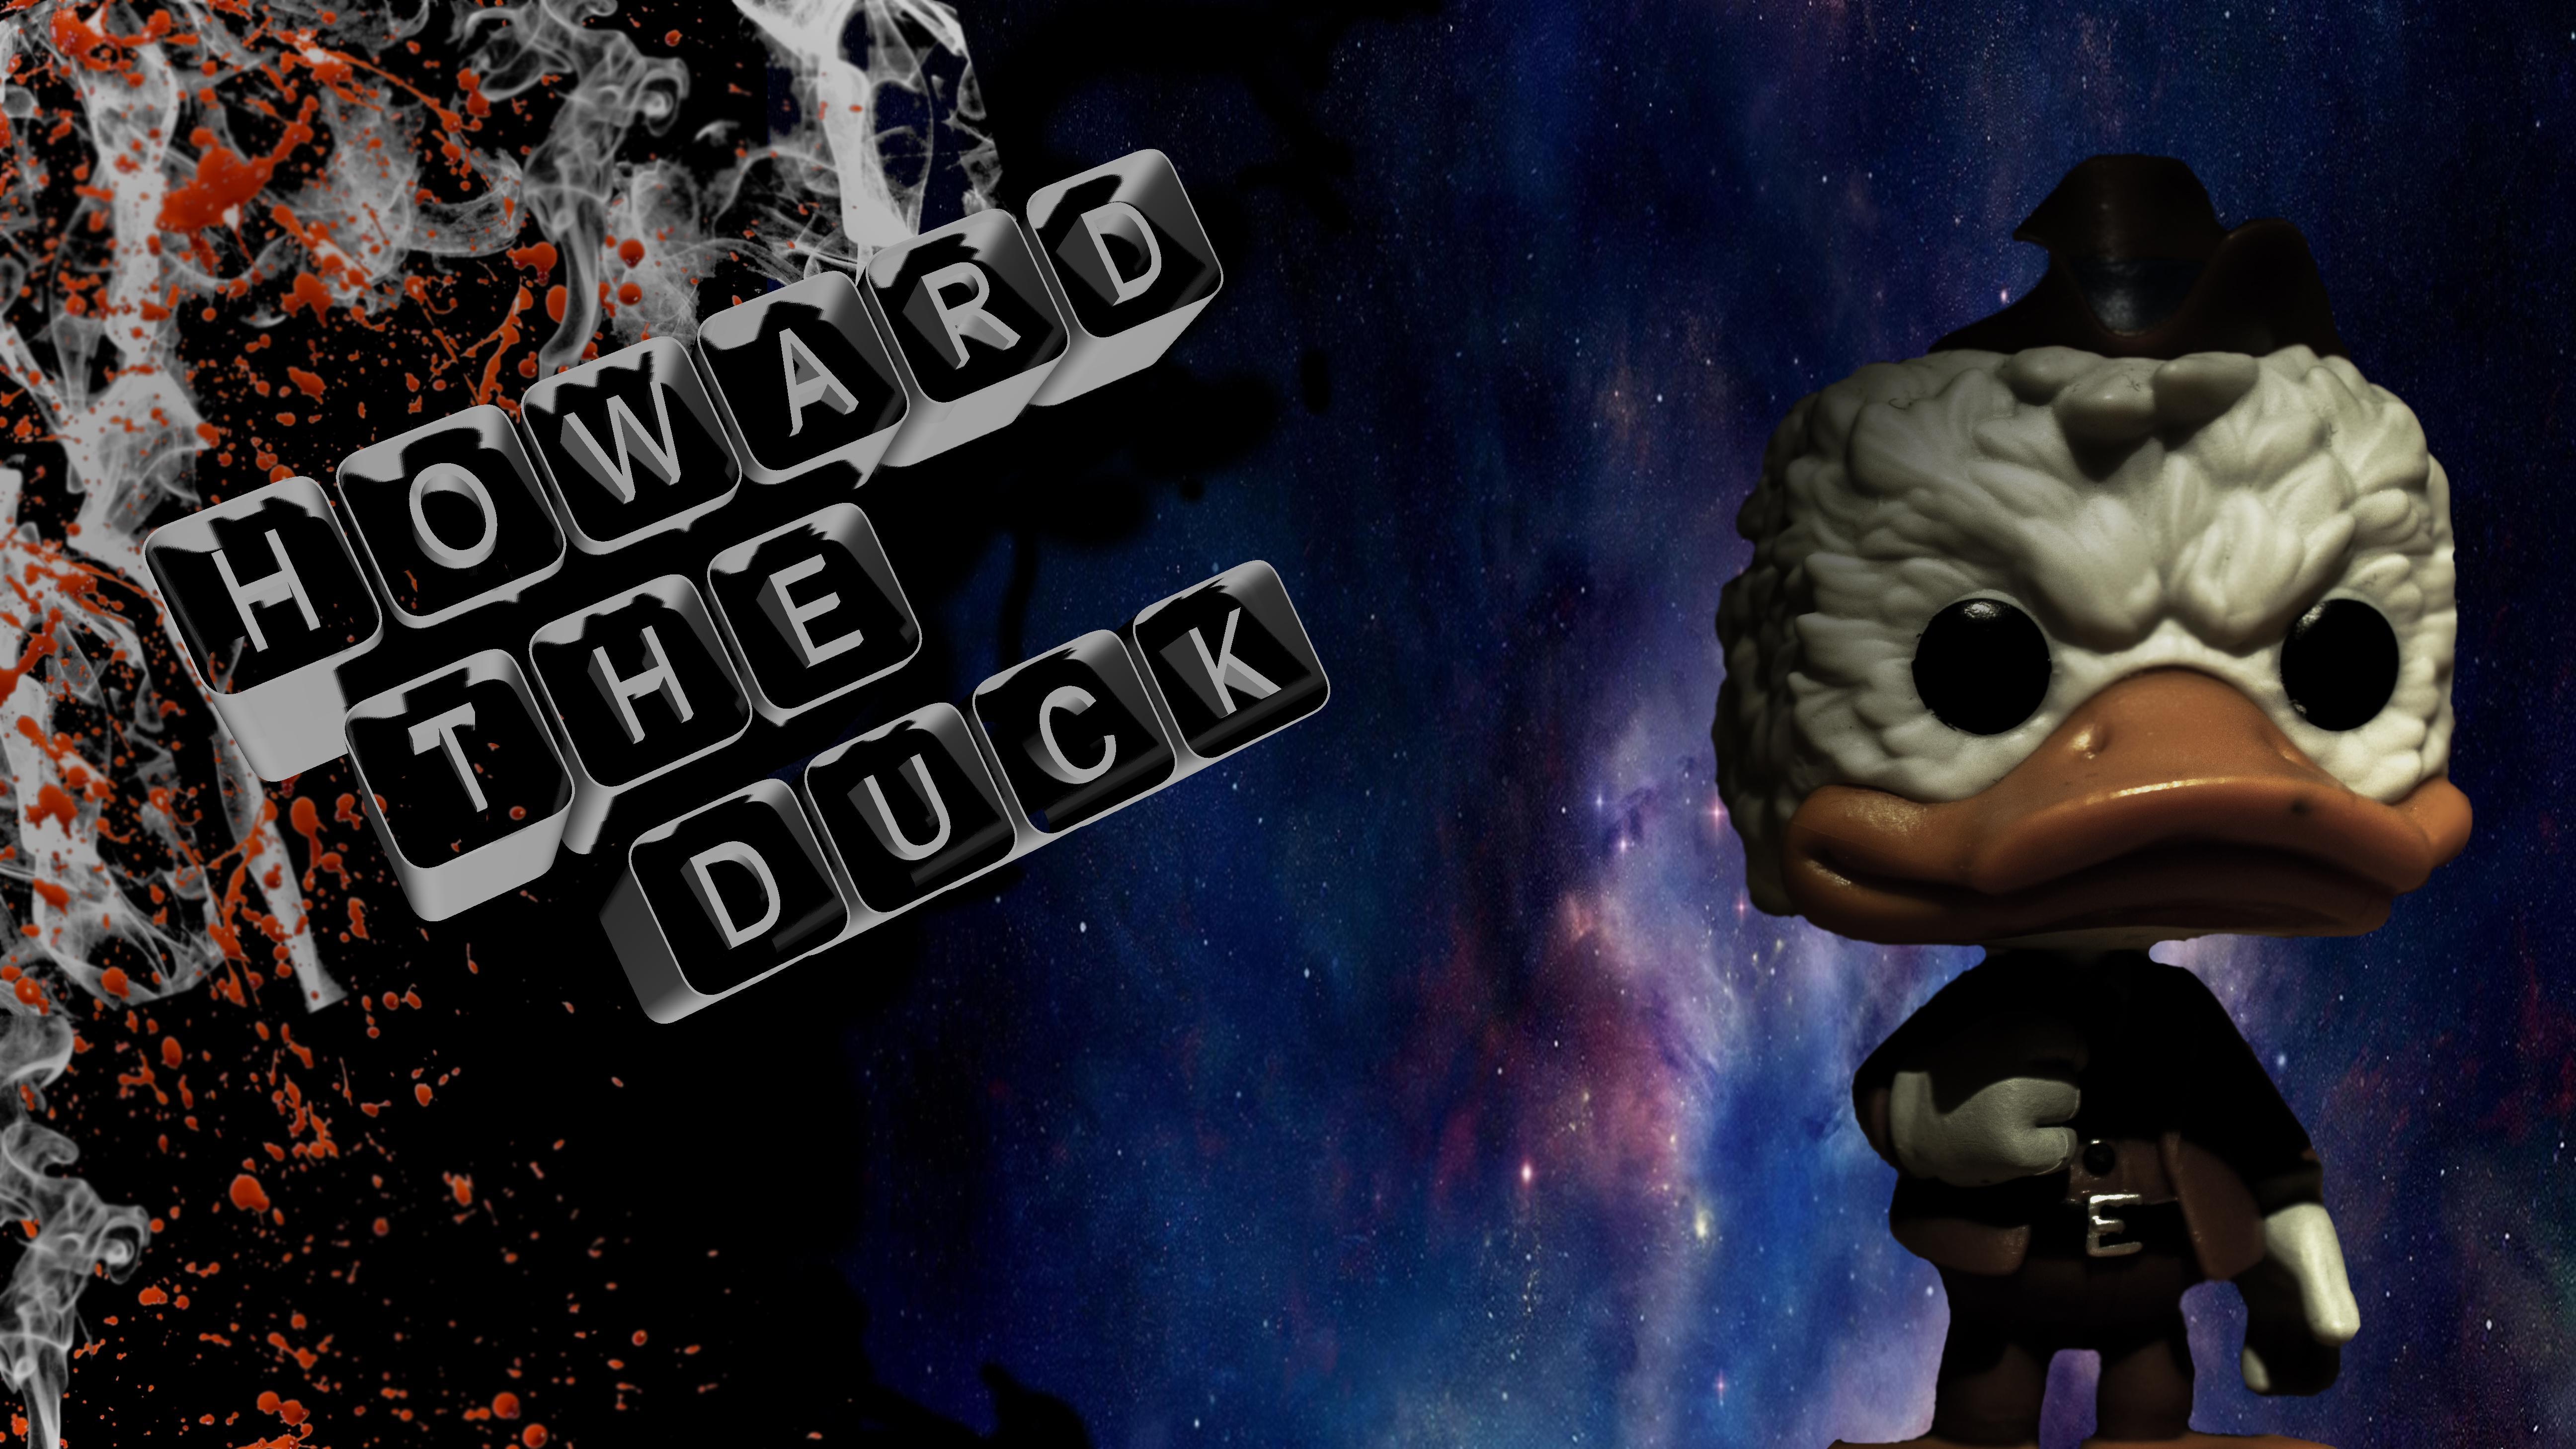 Howard The Duck wallpapers using a Funko Pop : Marvel